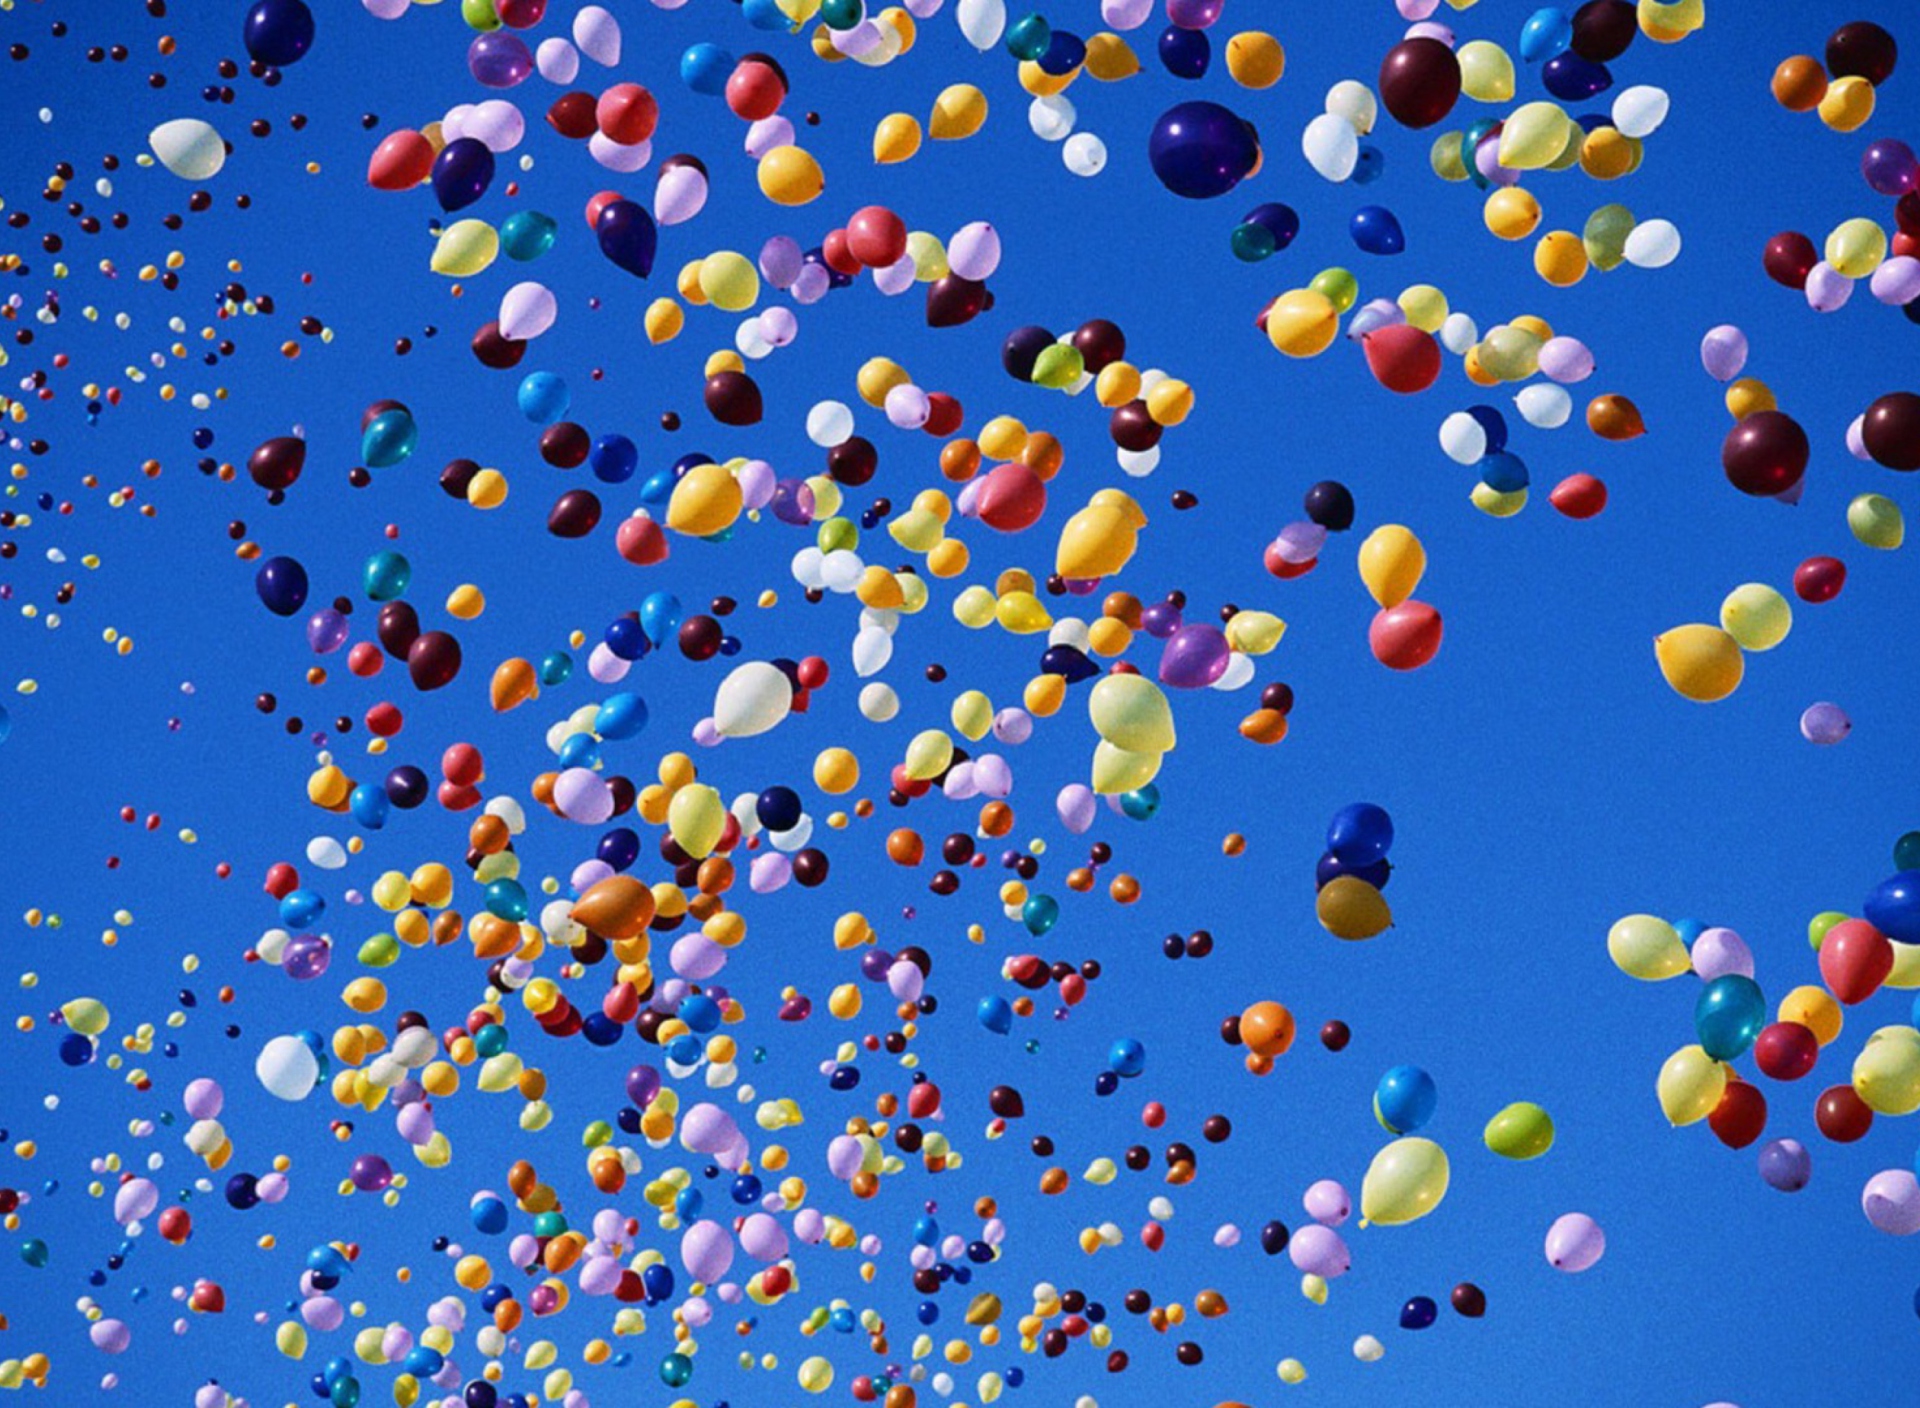 Colorful Balloons In Blue Sky wallpaper 1920x1408